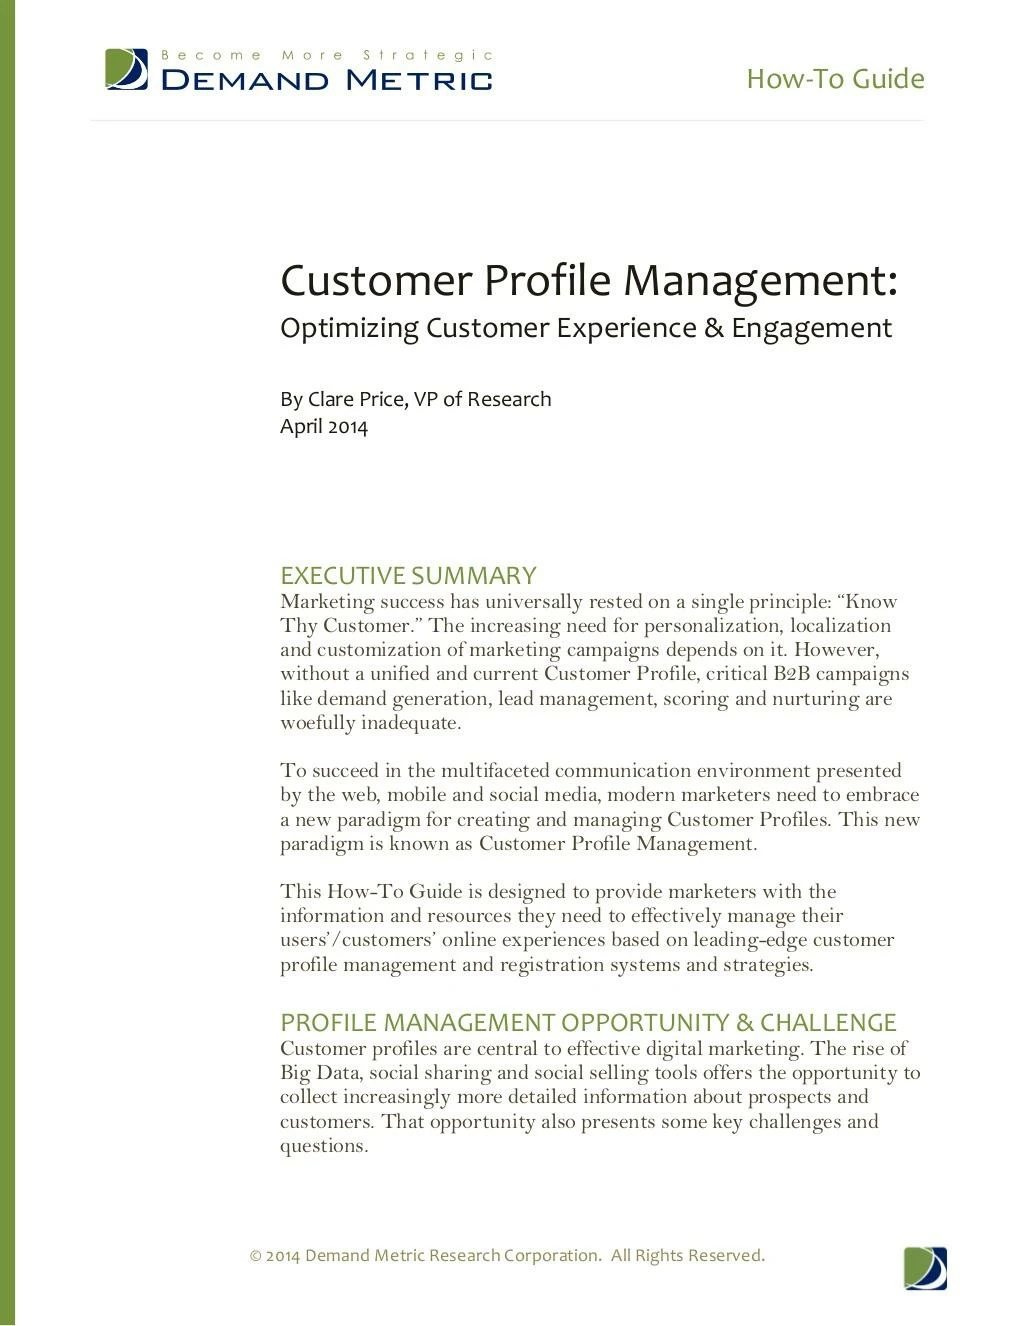 how to guide customer profile management